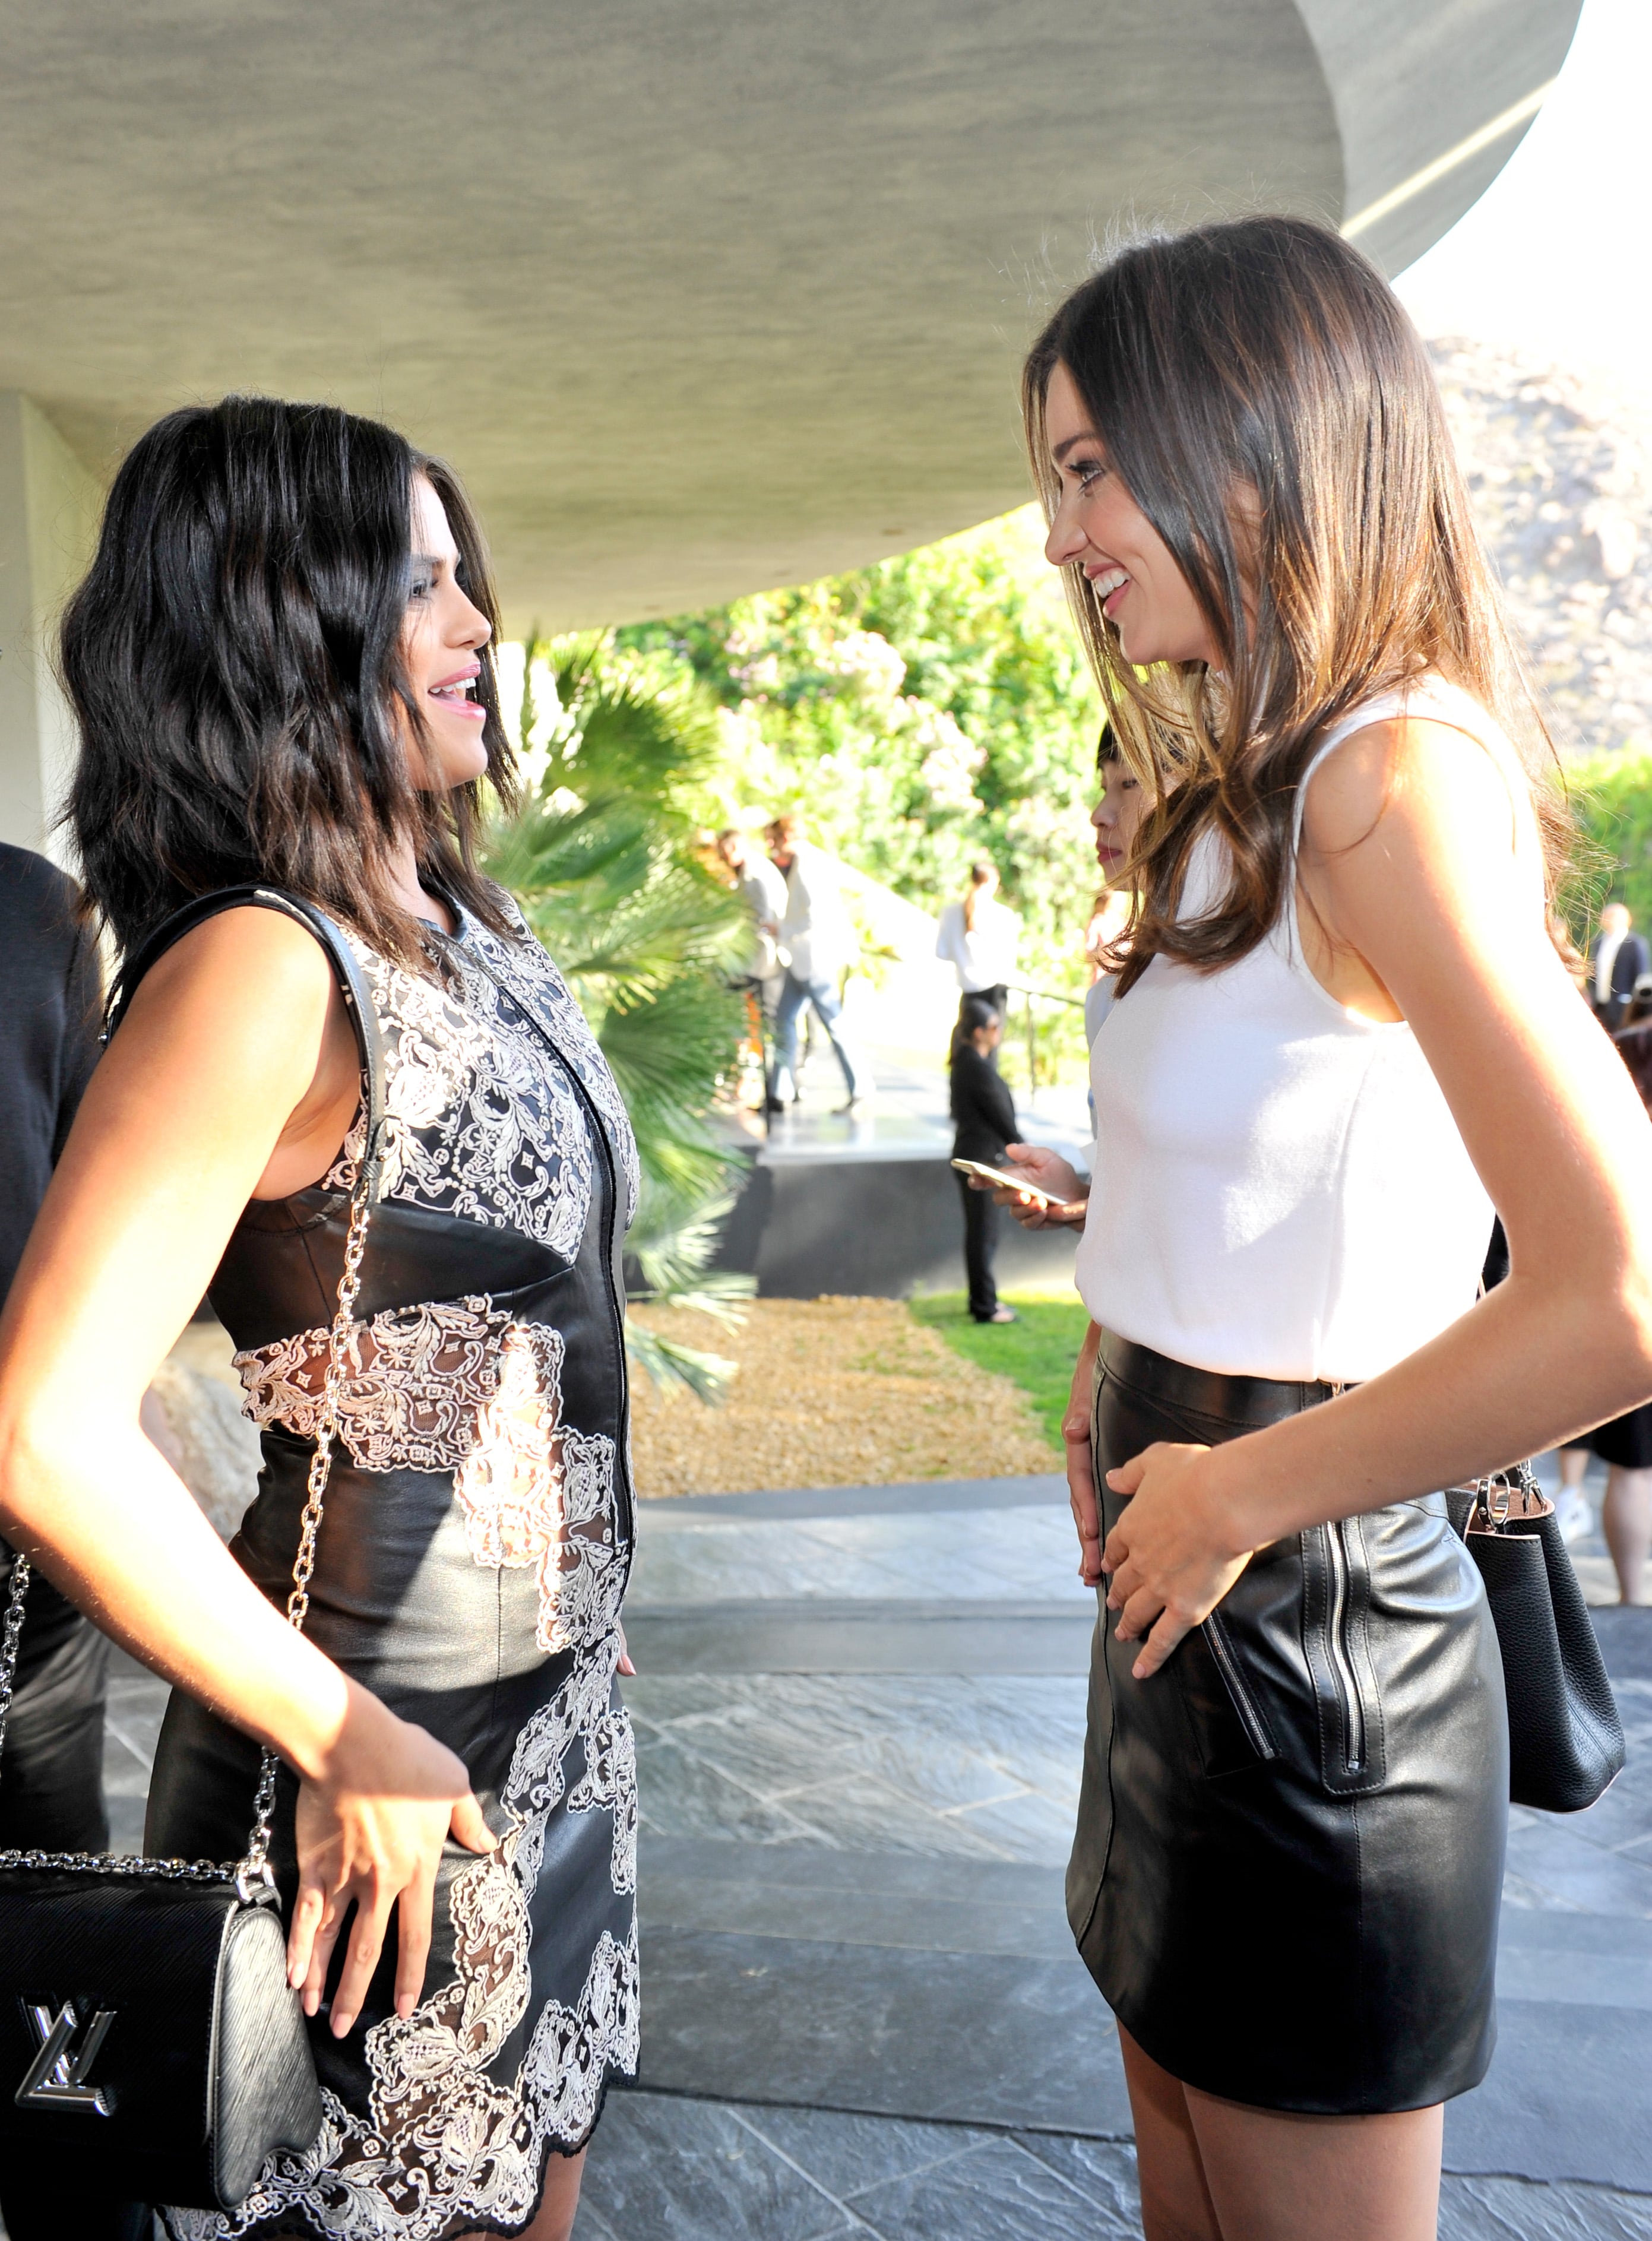 Selena attending Louis Vuitton Cruise 2016 Resort Collection candids plus  pics from inside